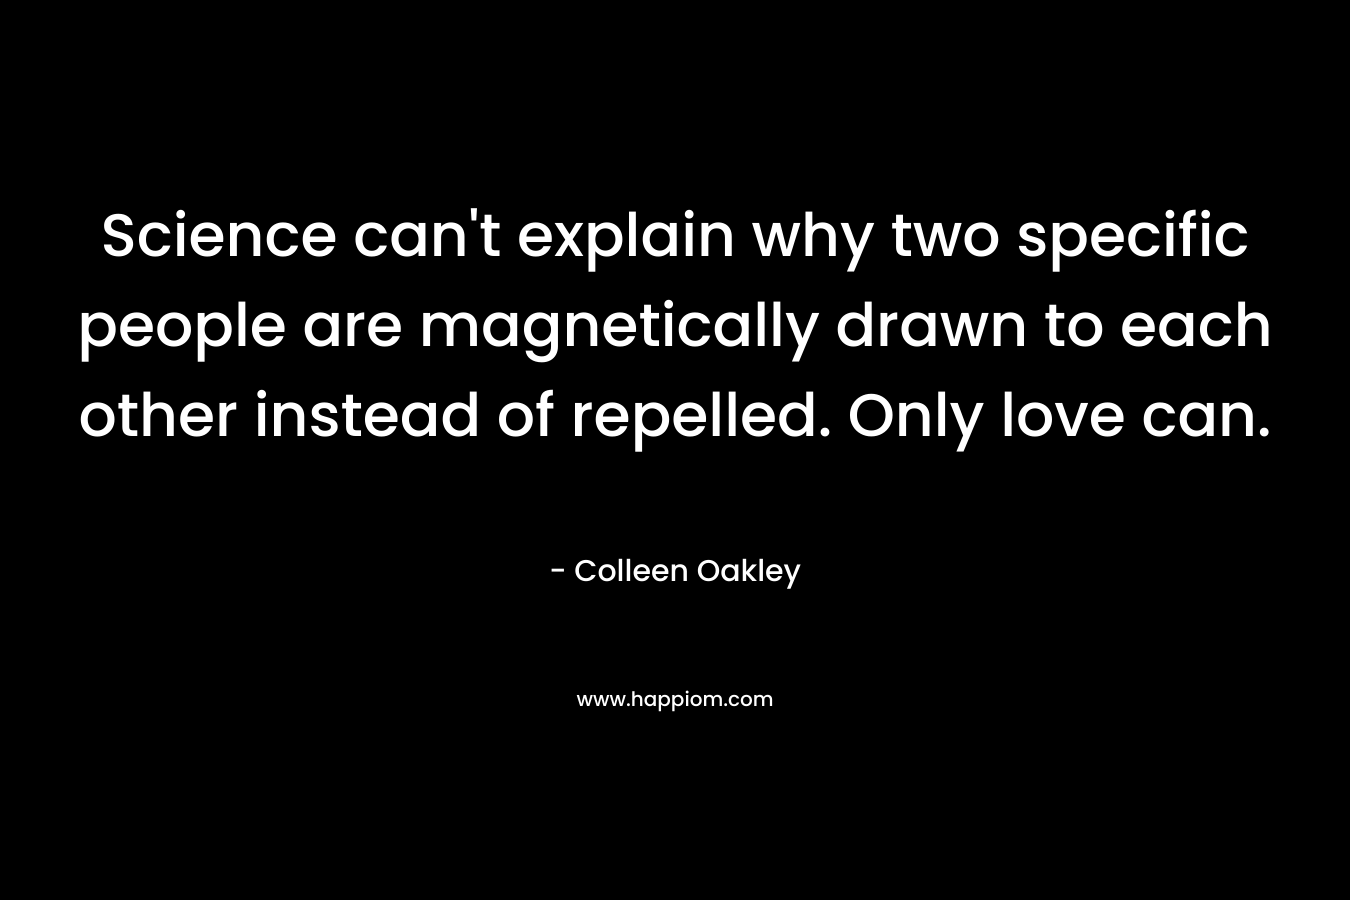 Science can't explain why two specific people are magnetically drawn to each other instead of repelled. Only love can.